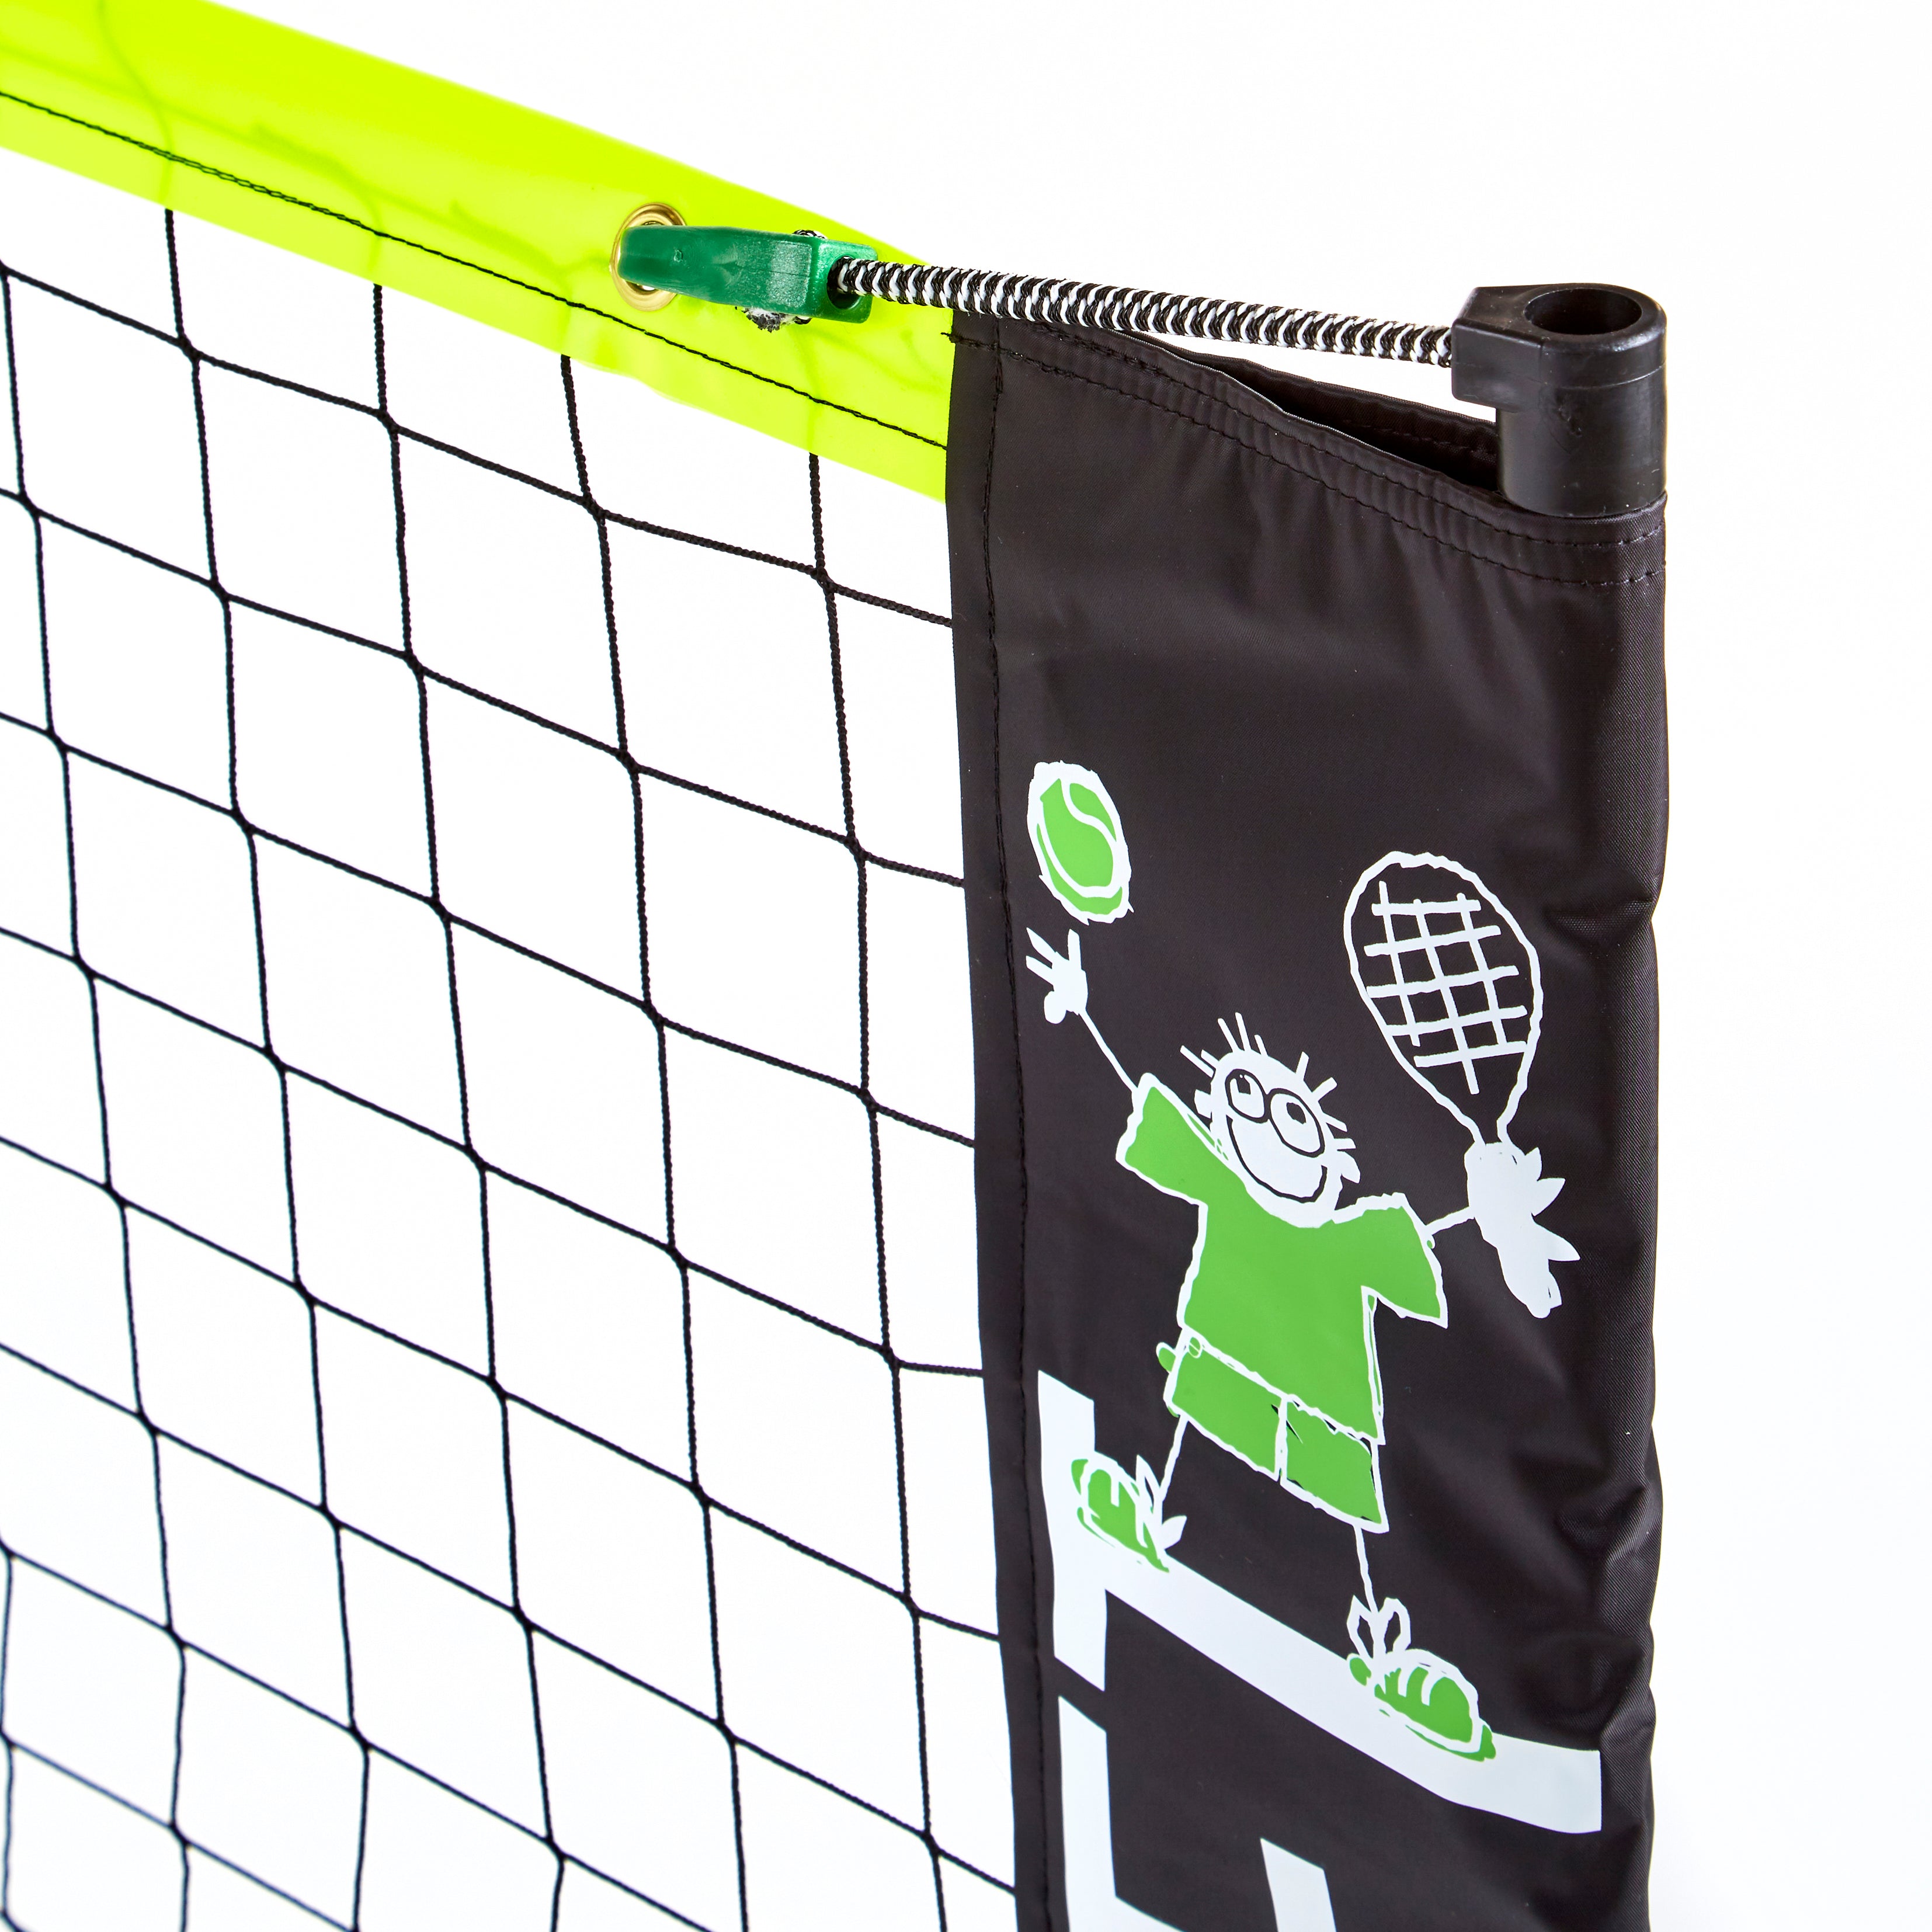 ZSIG Classic 3m Mini Tennis Net System clip & bungee tensioning